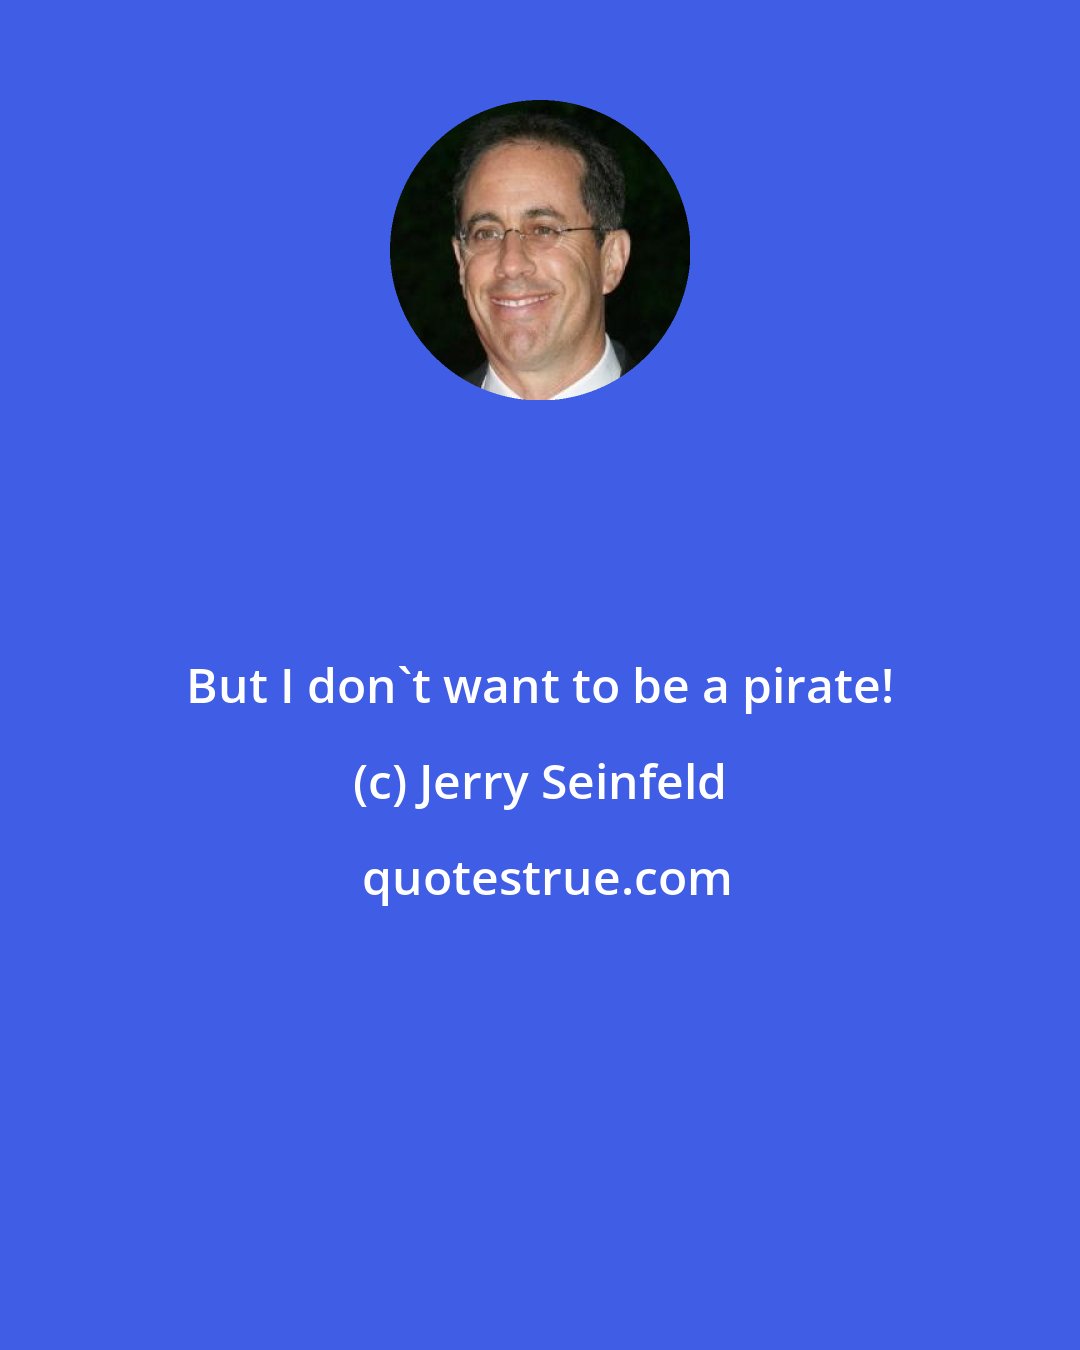 Jerry Seinfeld: But I don't want to be a pirate!